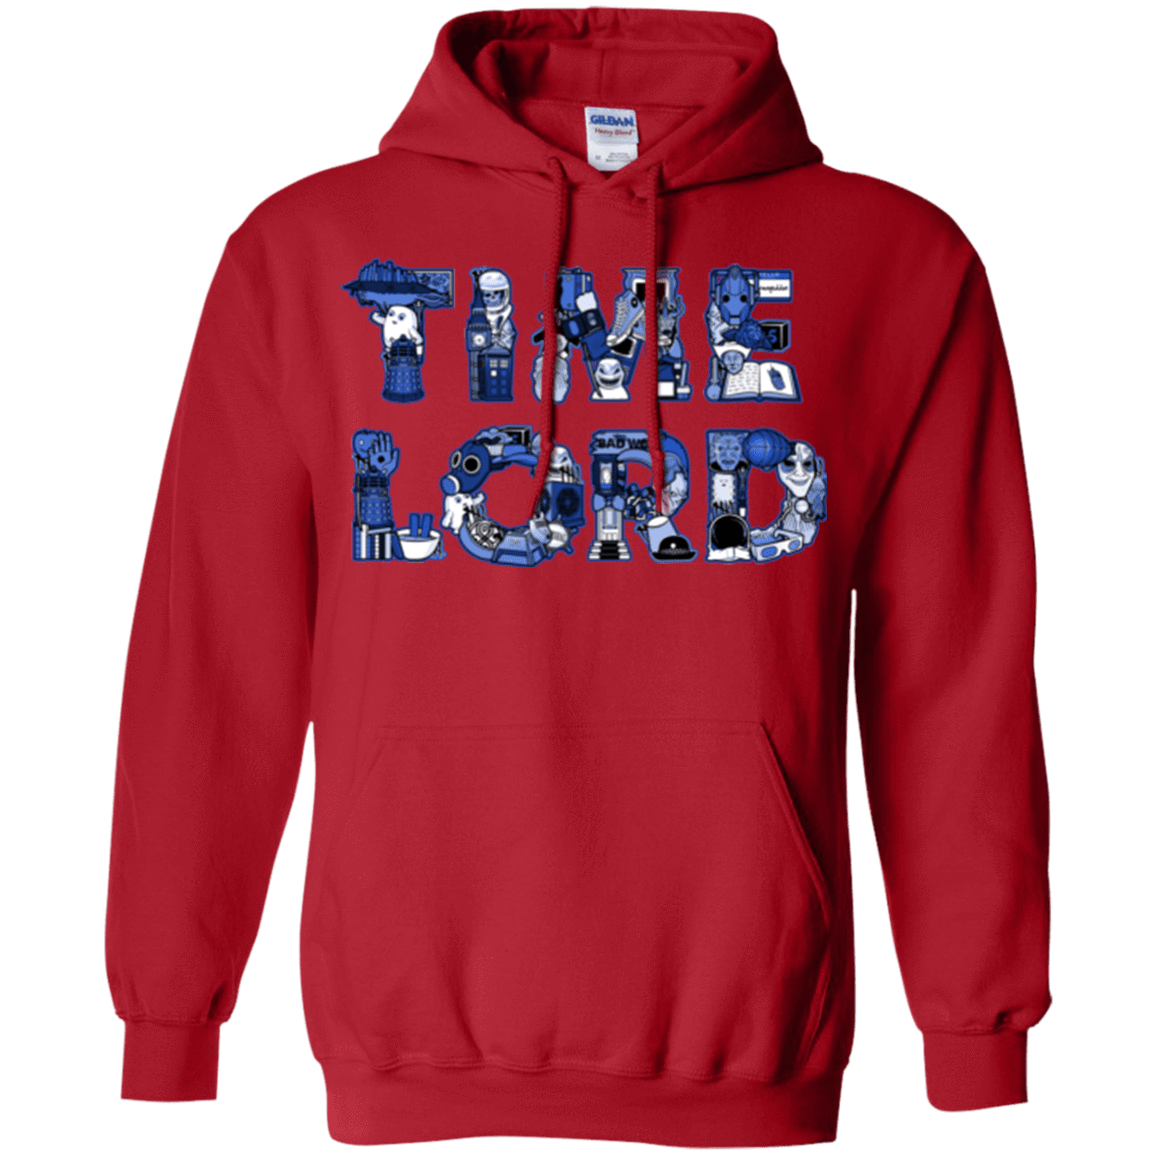 Sweatshirts Red / Small Timelord Pullover Hoodie